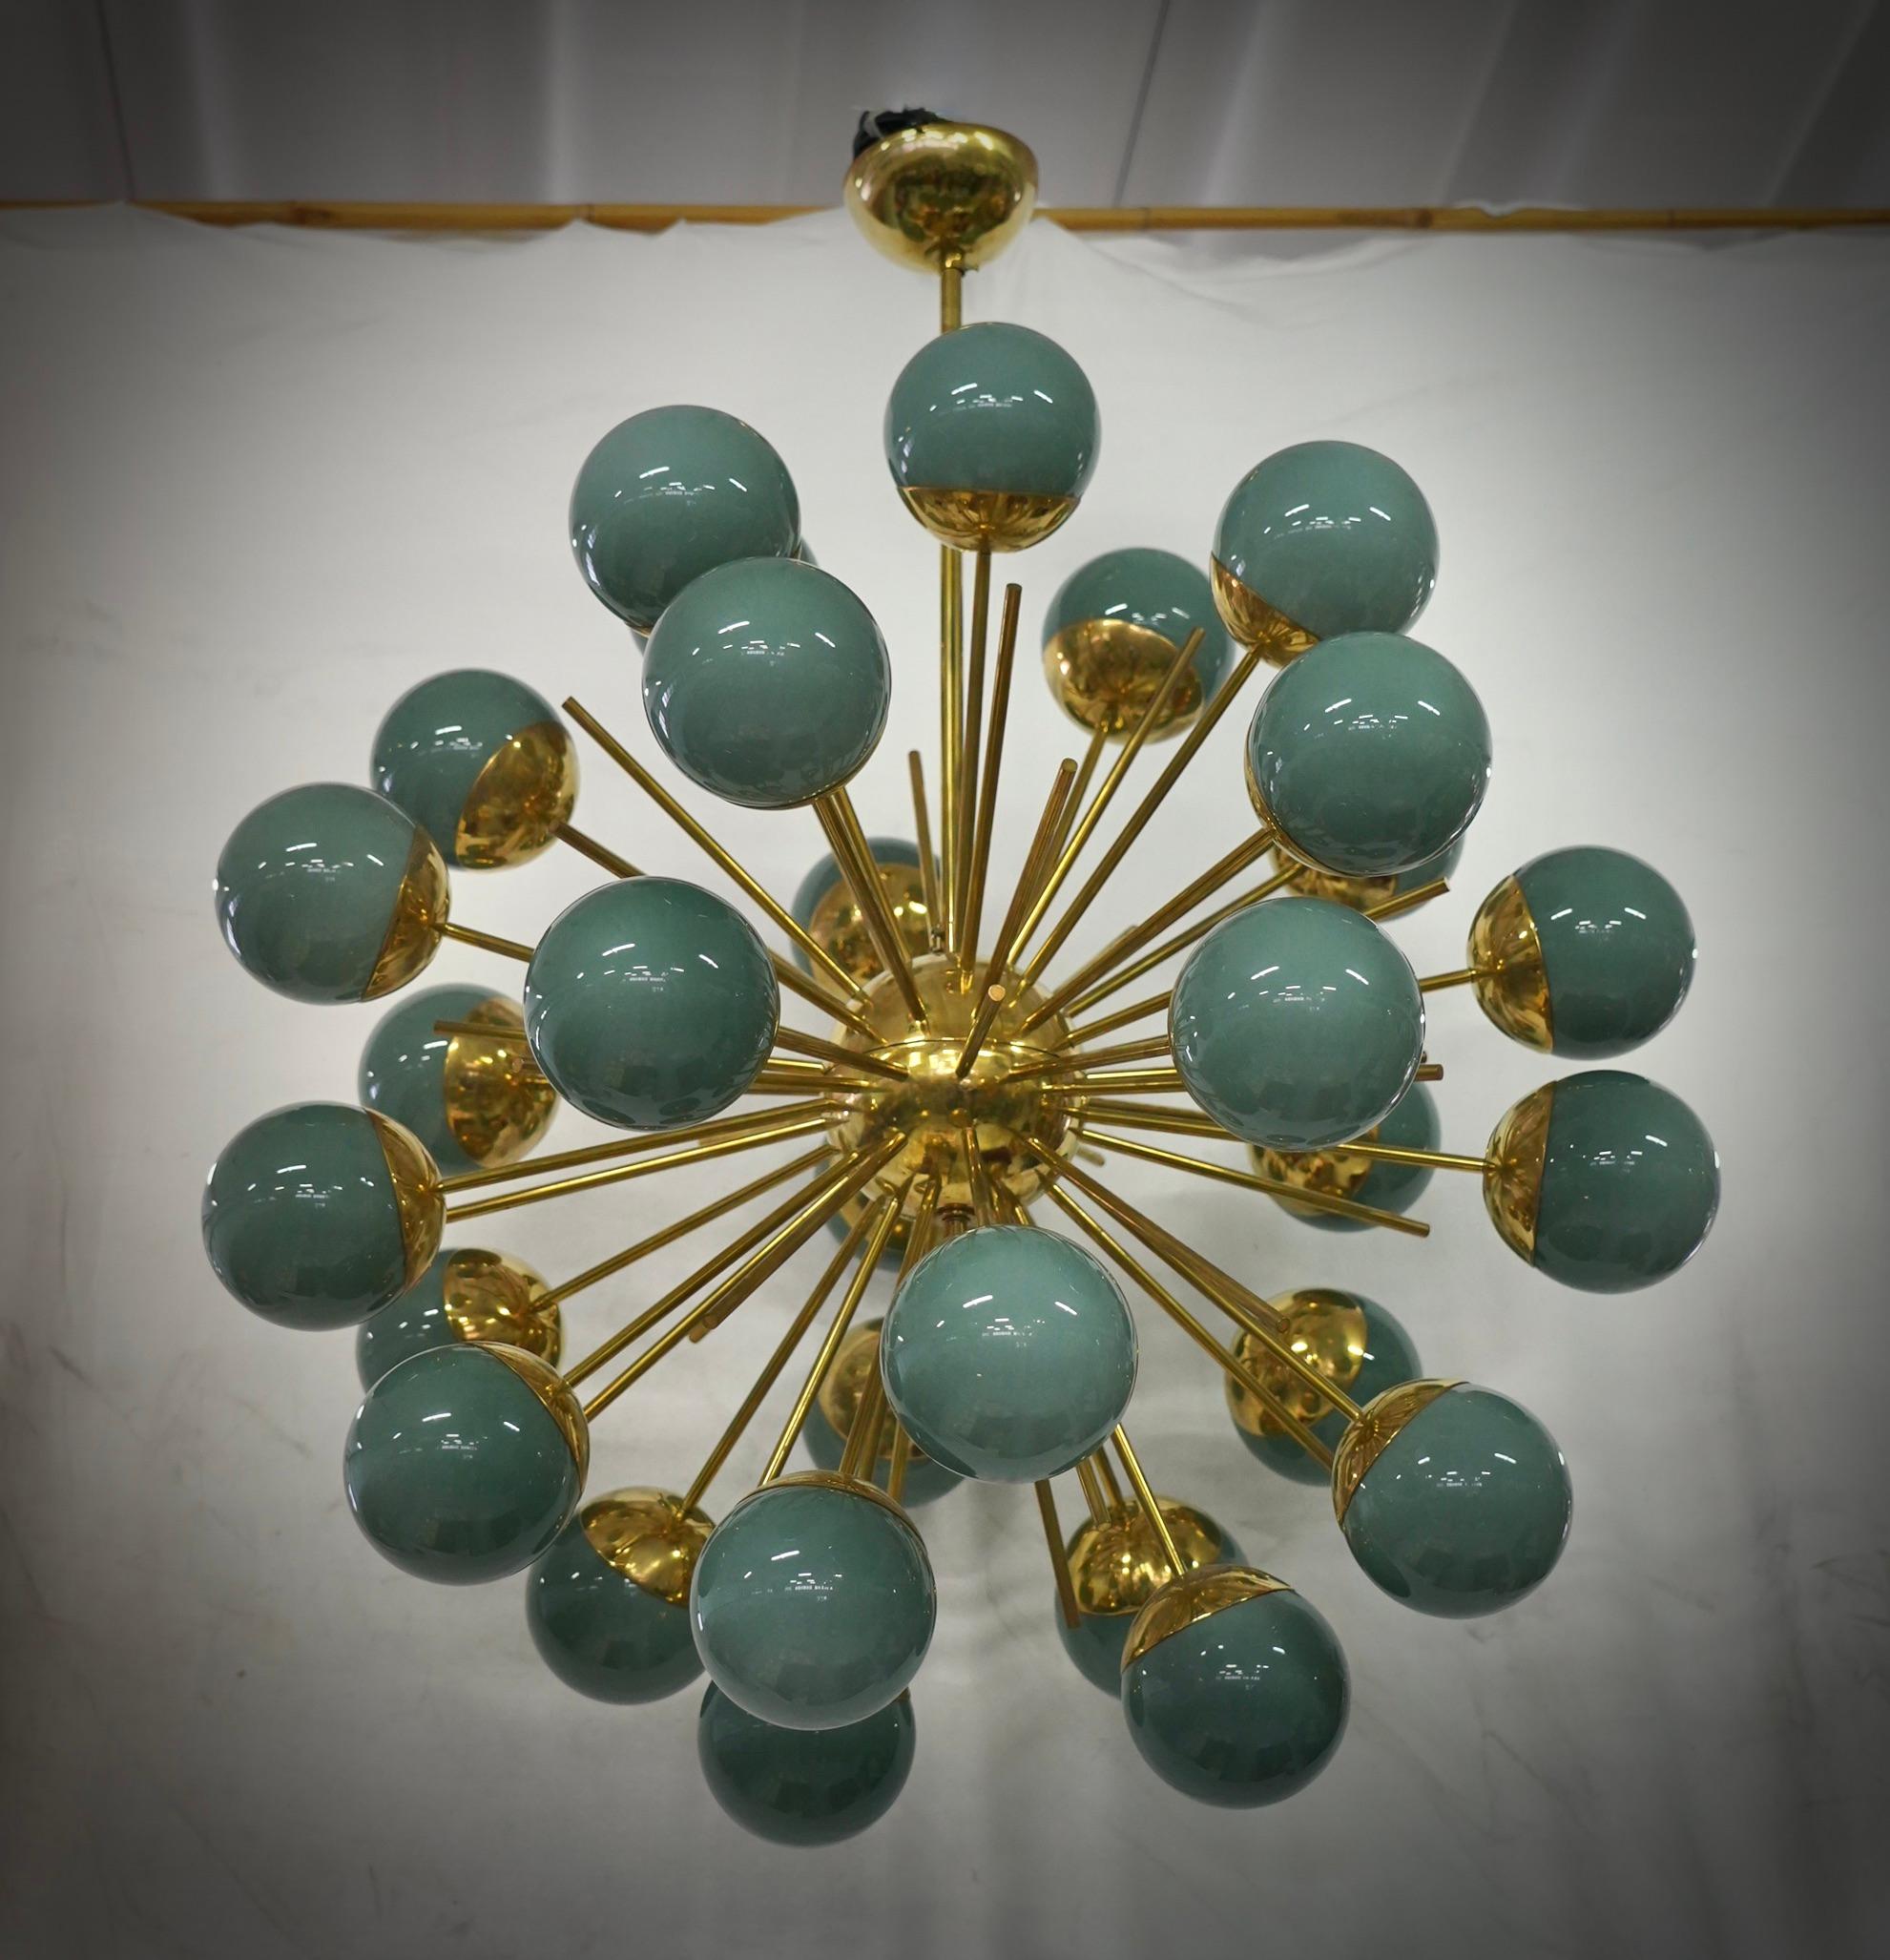 A fantastic spot of green color, amazing design due to its very particular shape of these green glass spheres and for the fantastic brass rods. Very elegant, will furnish and decorate your whole room.

Structure completely in brass like a sputnik